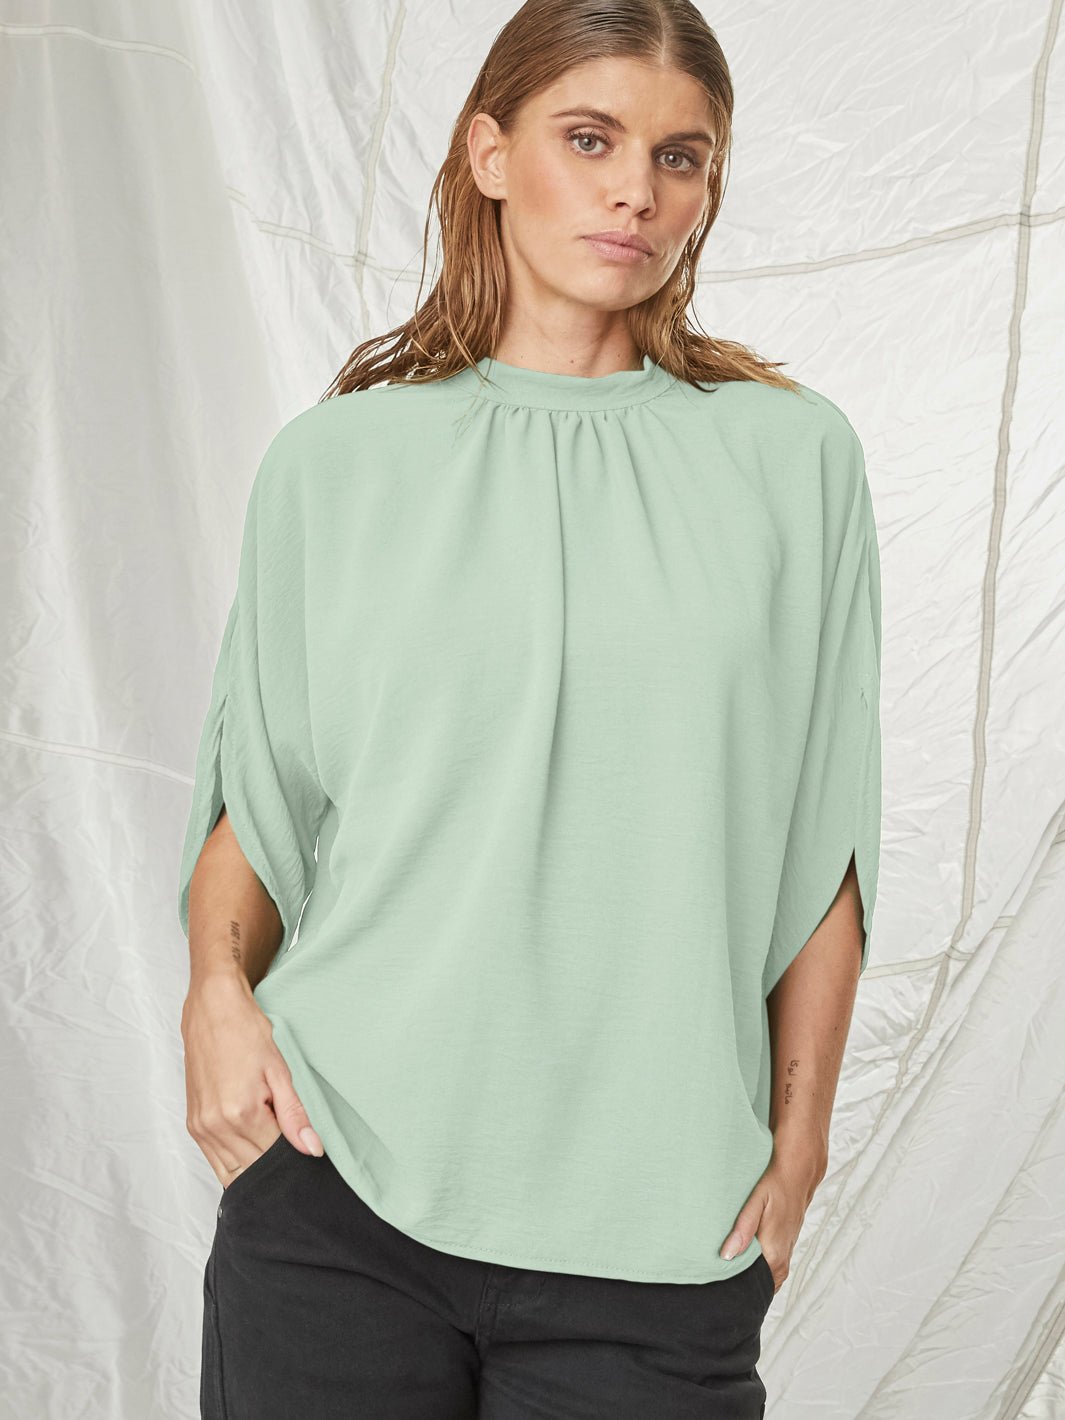 All Week Anni bluse mint green - Online-Mode